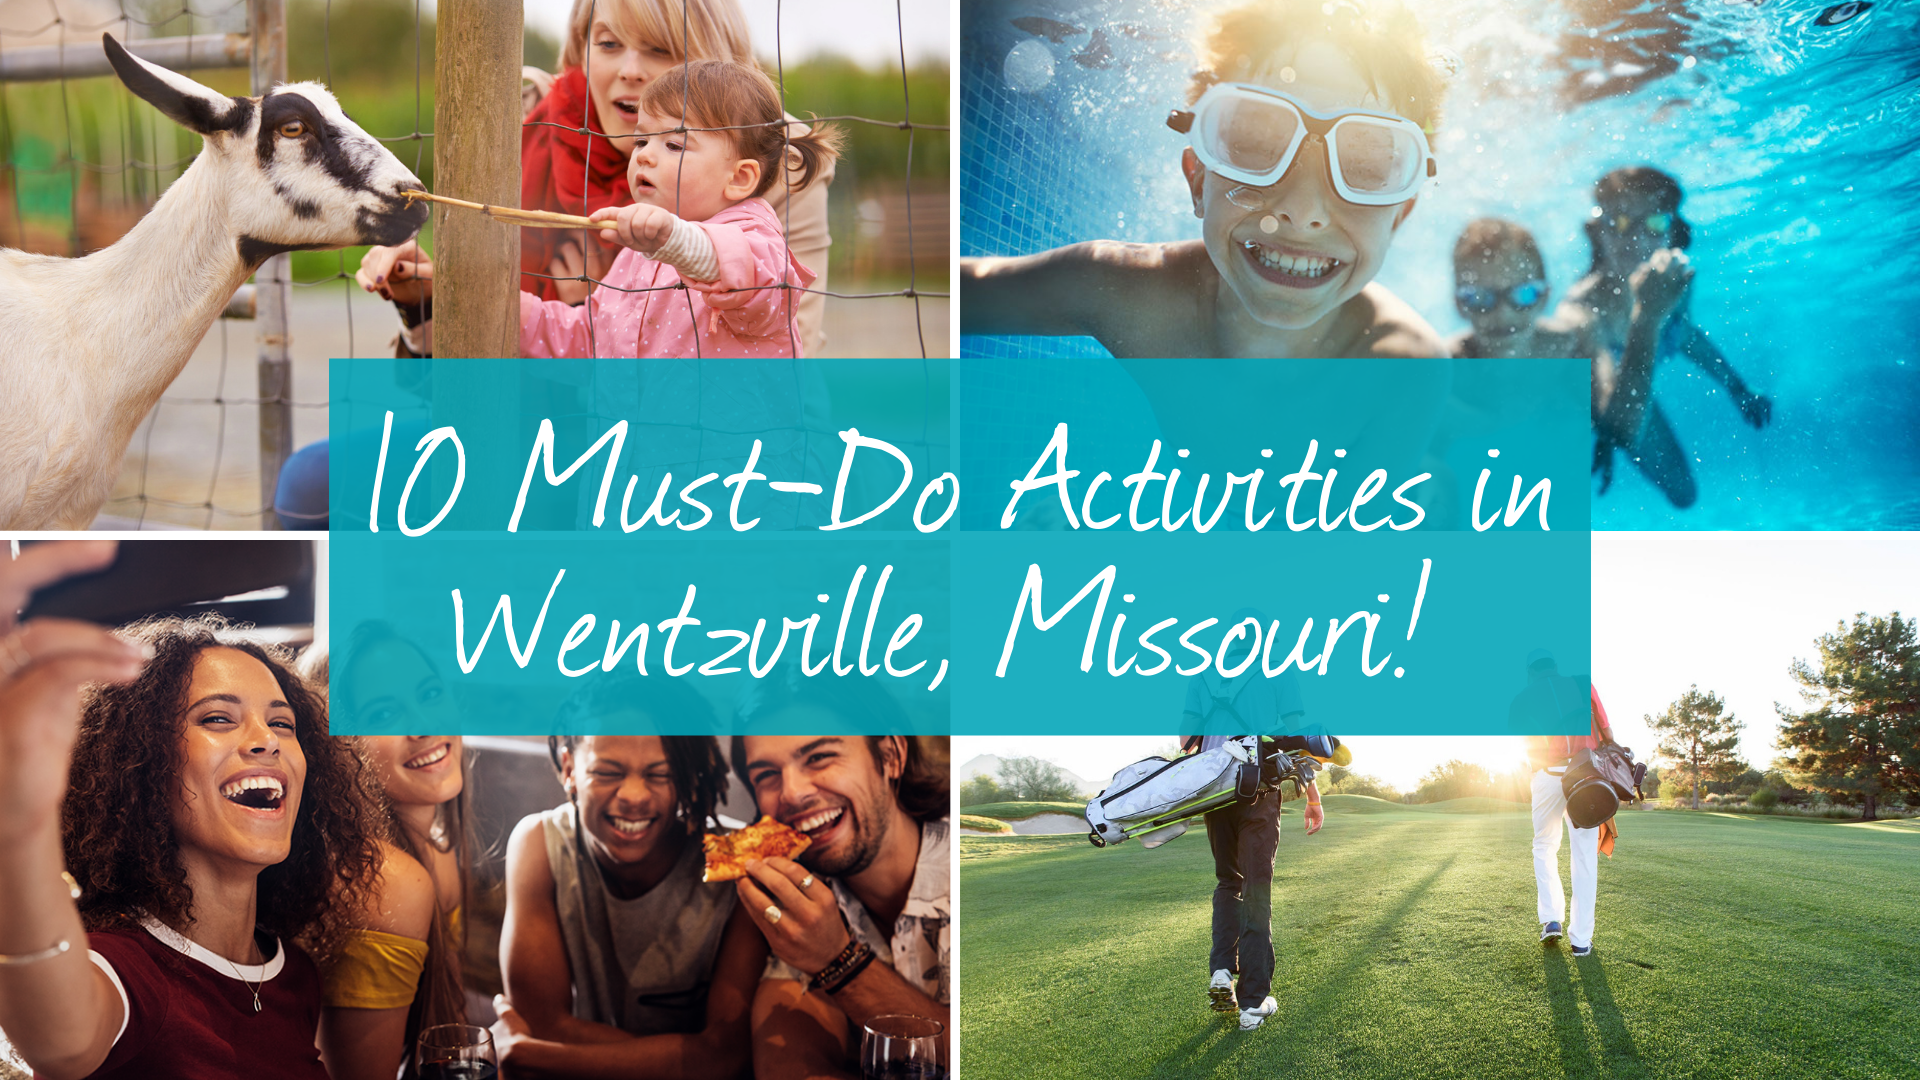 Discover 10 Exciting Things to do in Wentzville, Missouri!